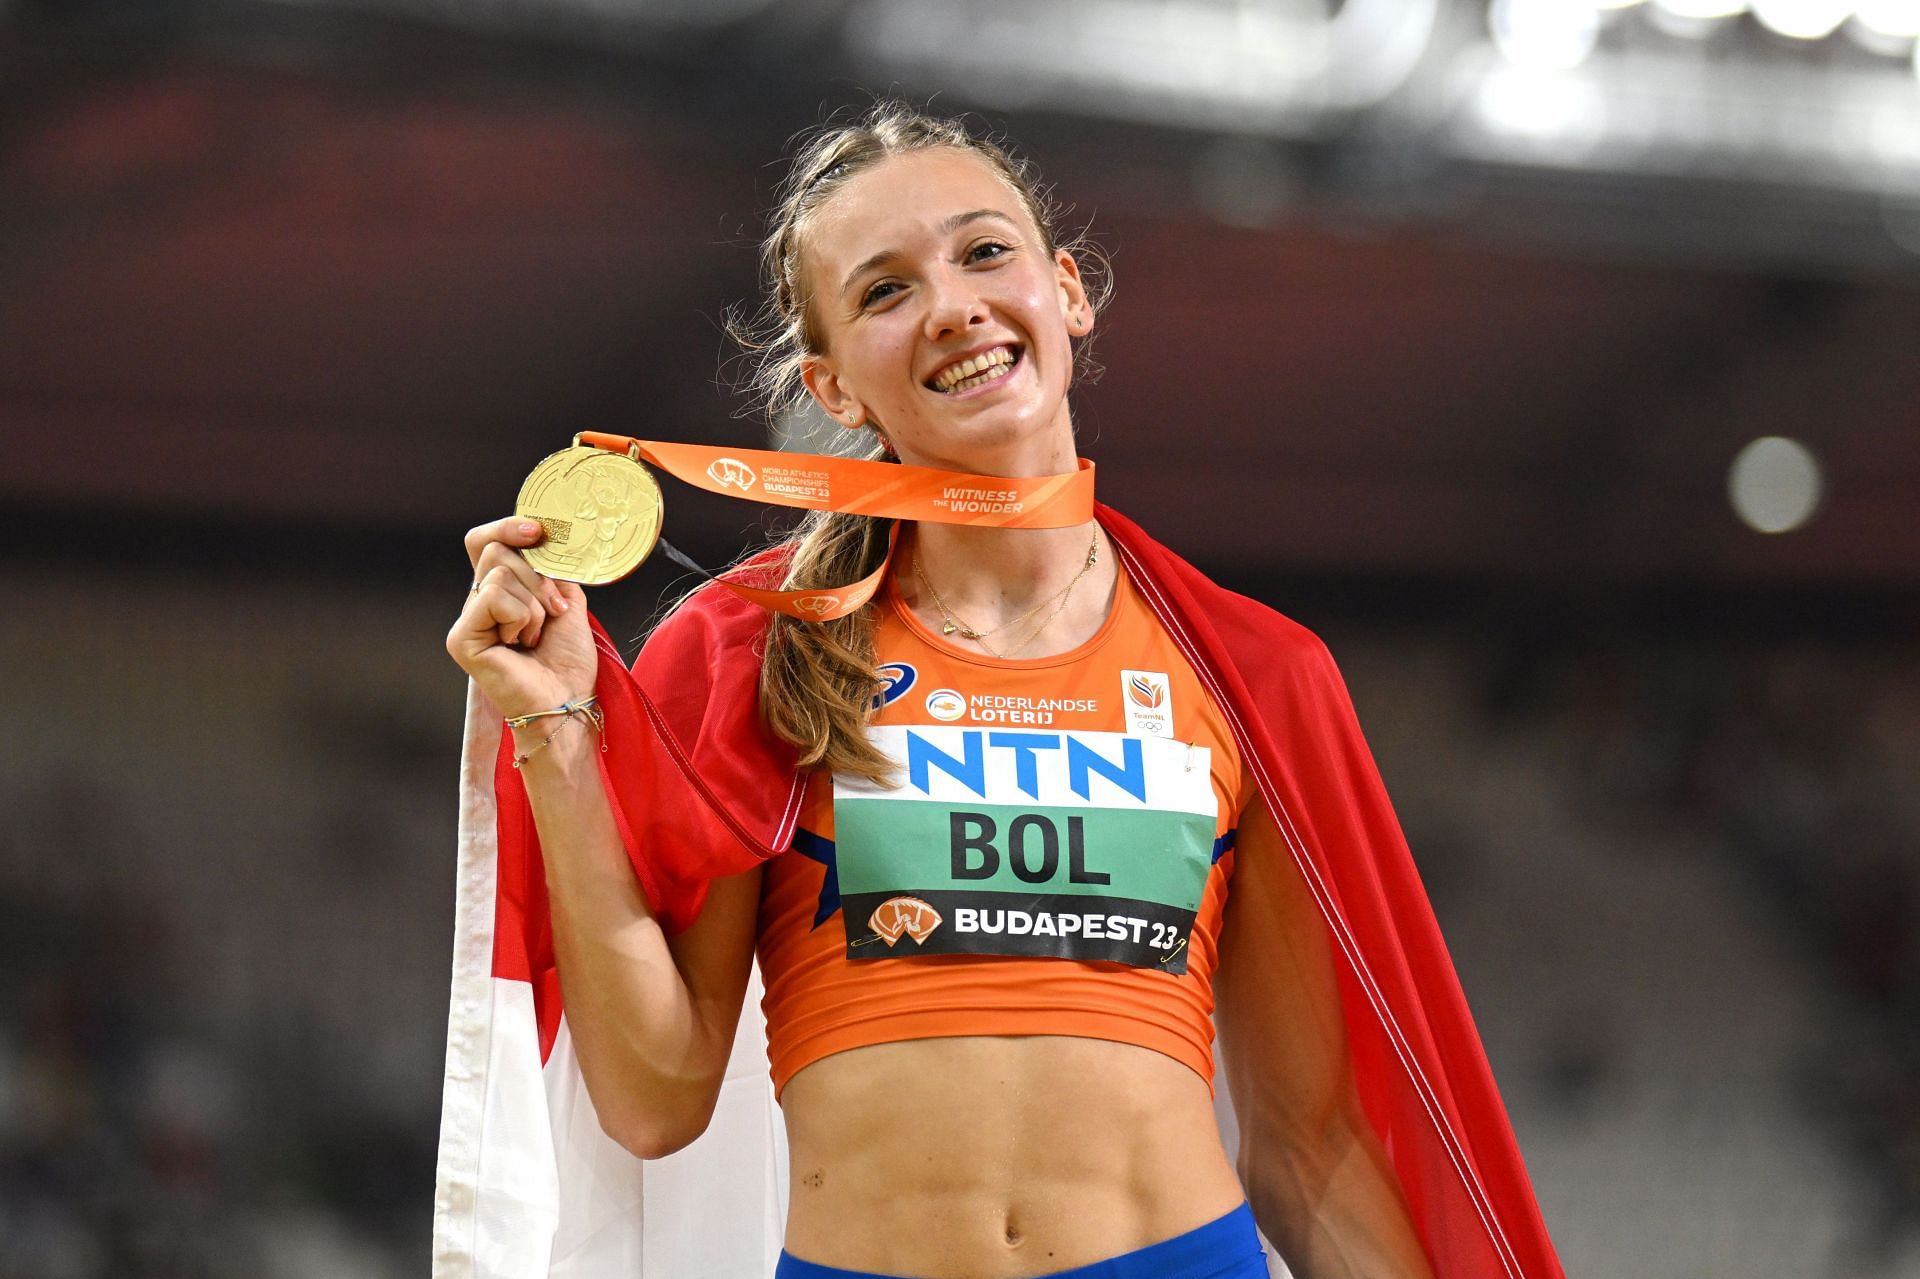 Femke Bol of Team Netherlands celebrates winning the Women&#039;s 400m Hurdles Final during the 2023 World Athletics Championships at the National Athletics Centre in Budapest, Hungary.